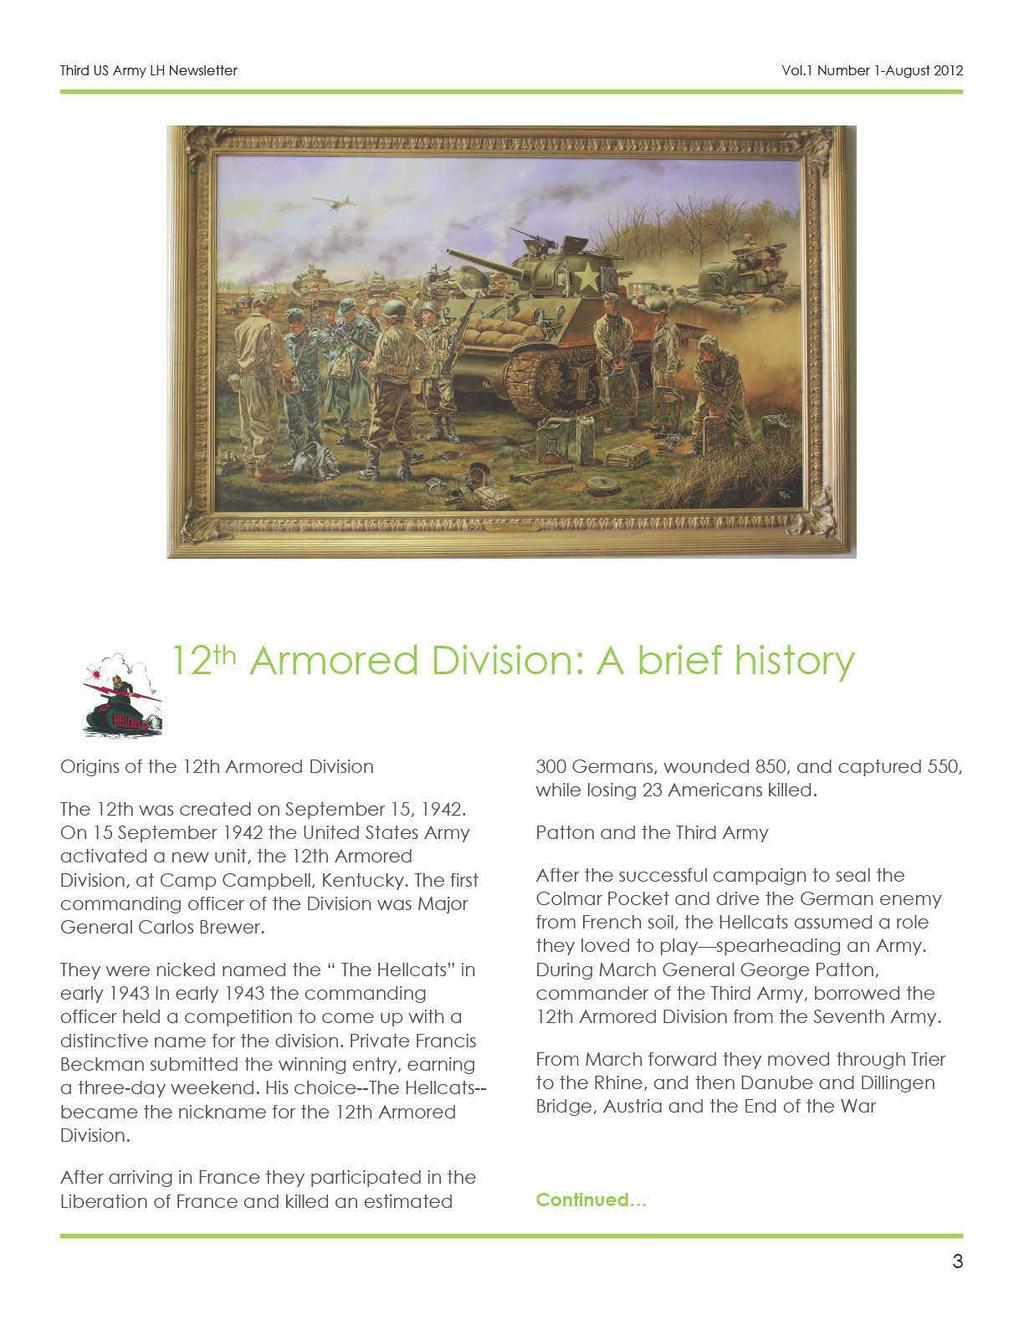 Third US Army LH Newsletter Vol.l Number 1-August 2012, 1 ( \ 12th Armored Division: A brief history ~ Origins of the 12th Armored Division The 12th was created on September 15, 1942.